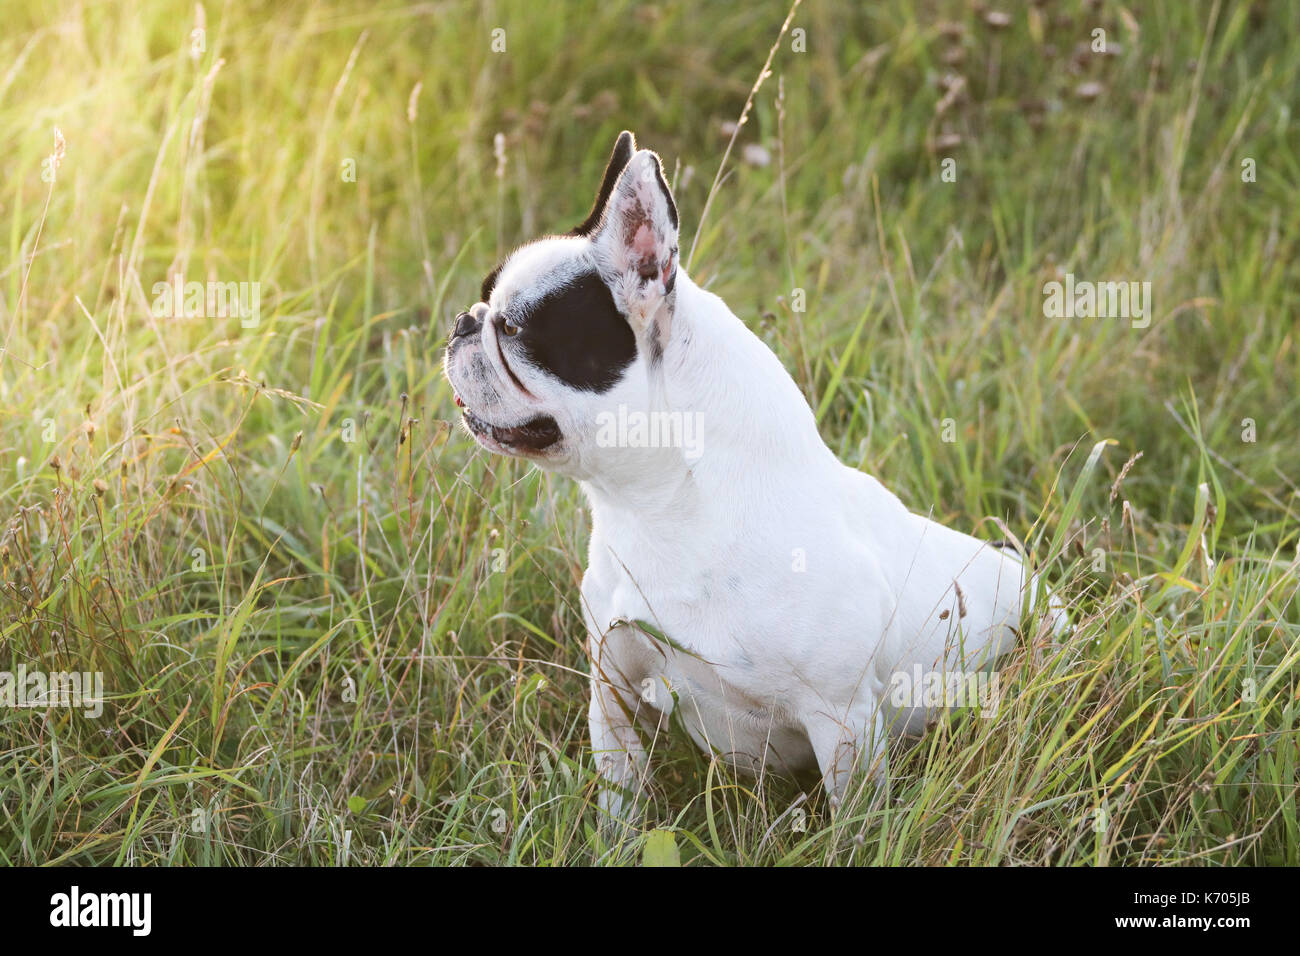 Small White Dog With Black Ears And Eyes Stock Photos